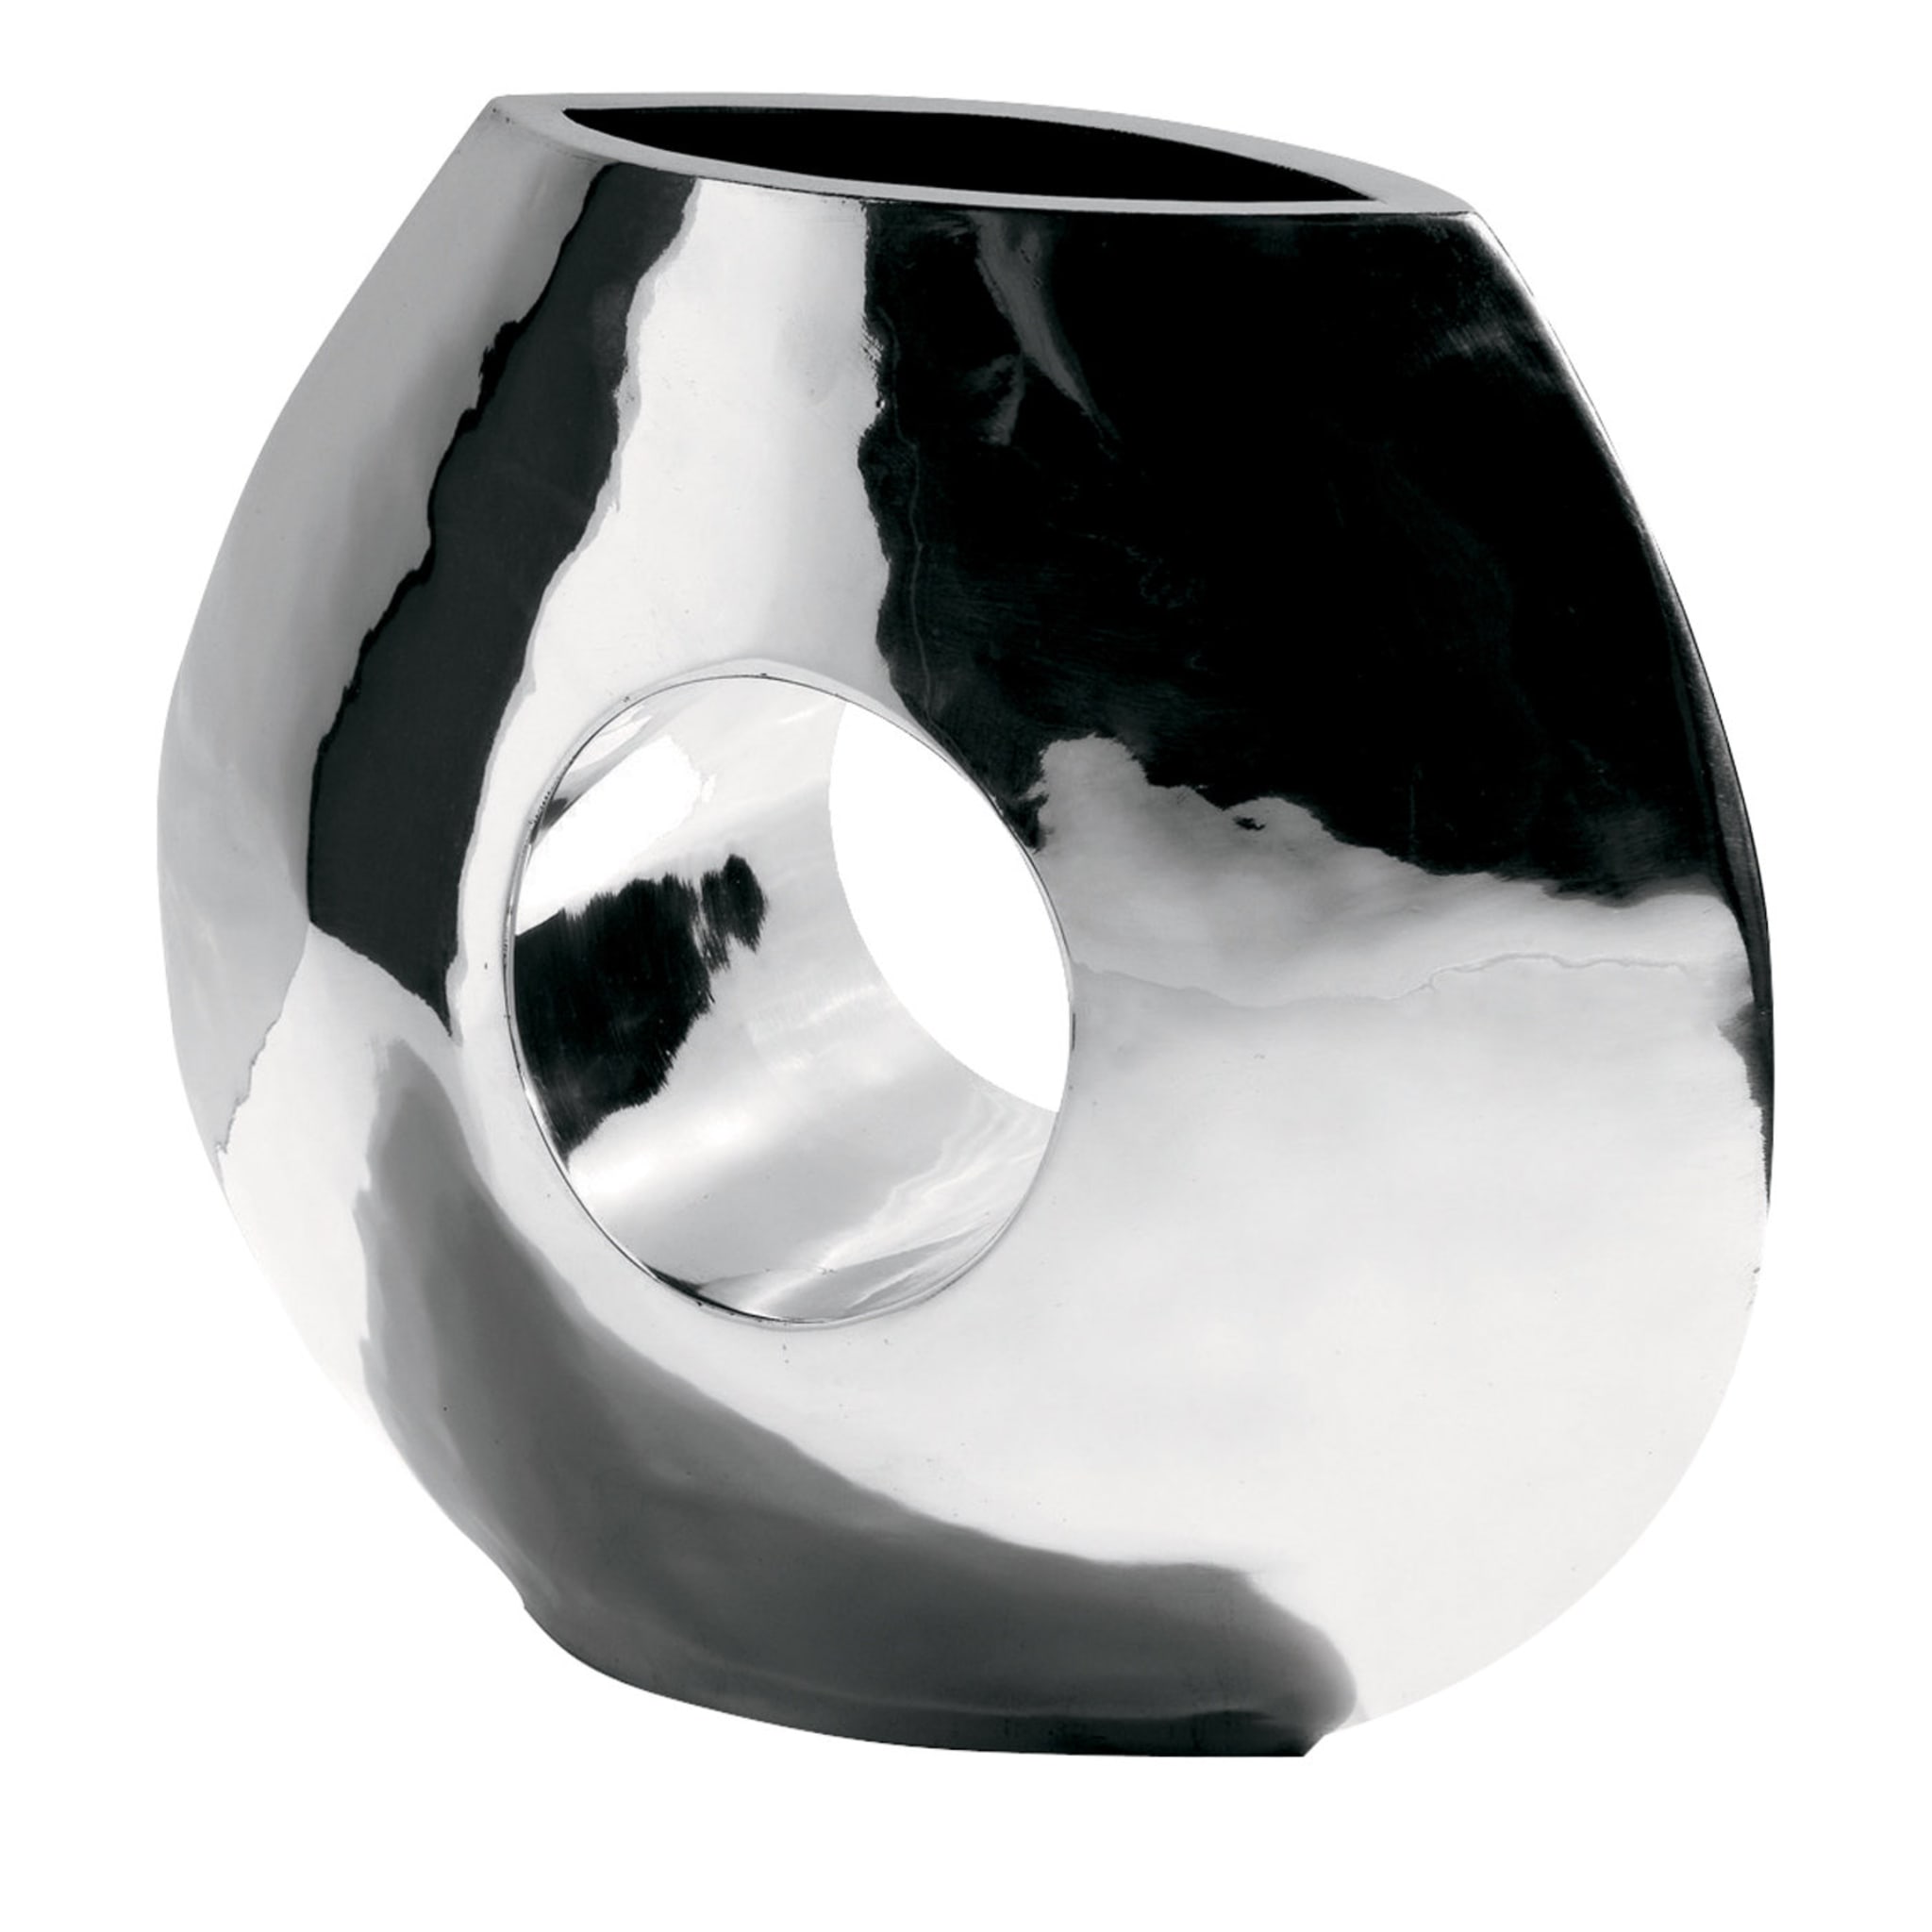 Dodici Limited Edition Vase by Mario Botta - Main view